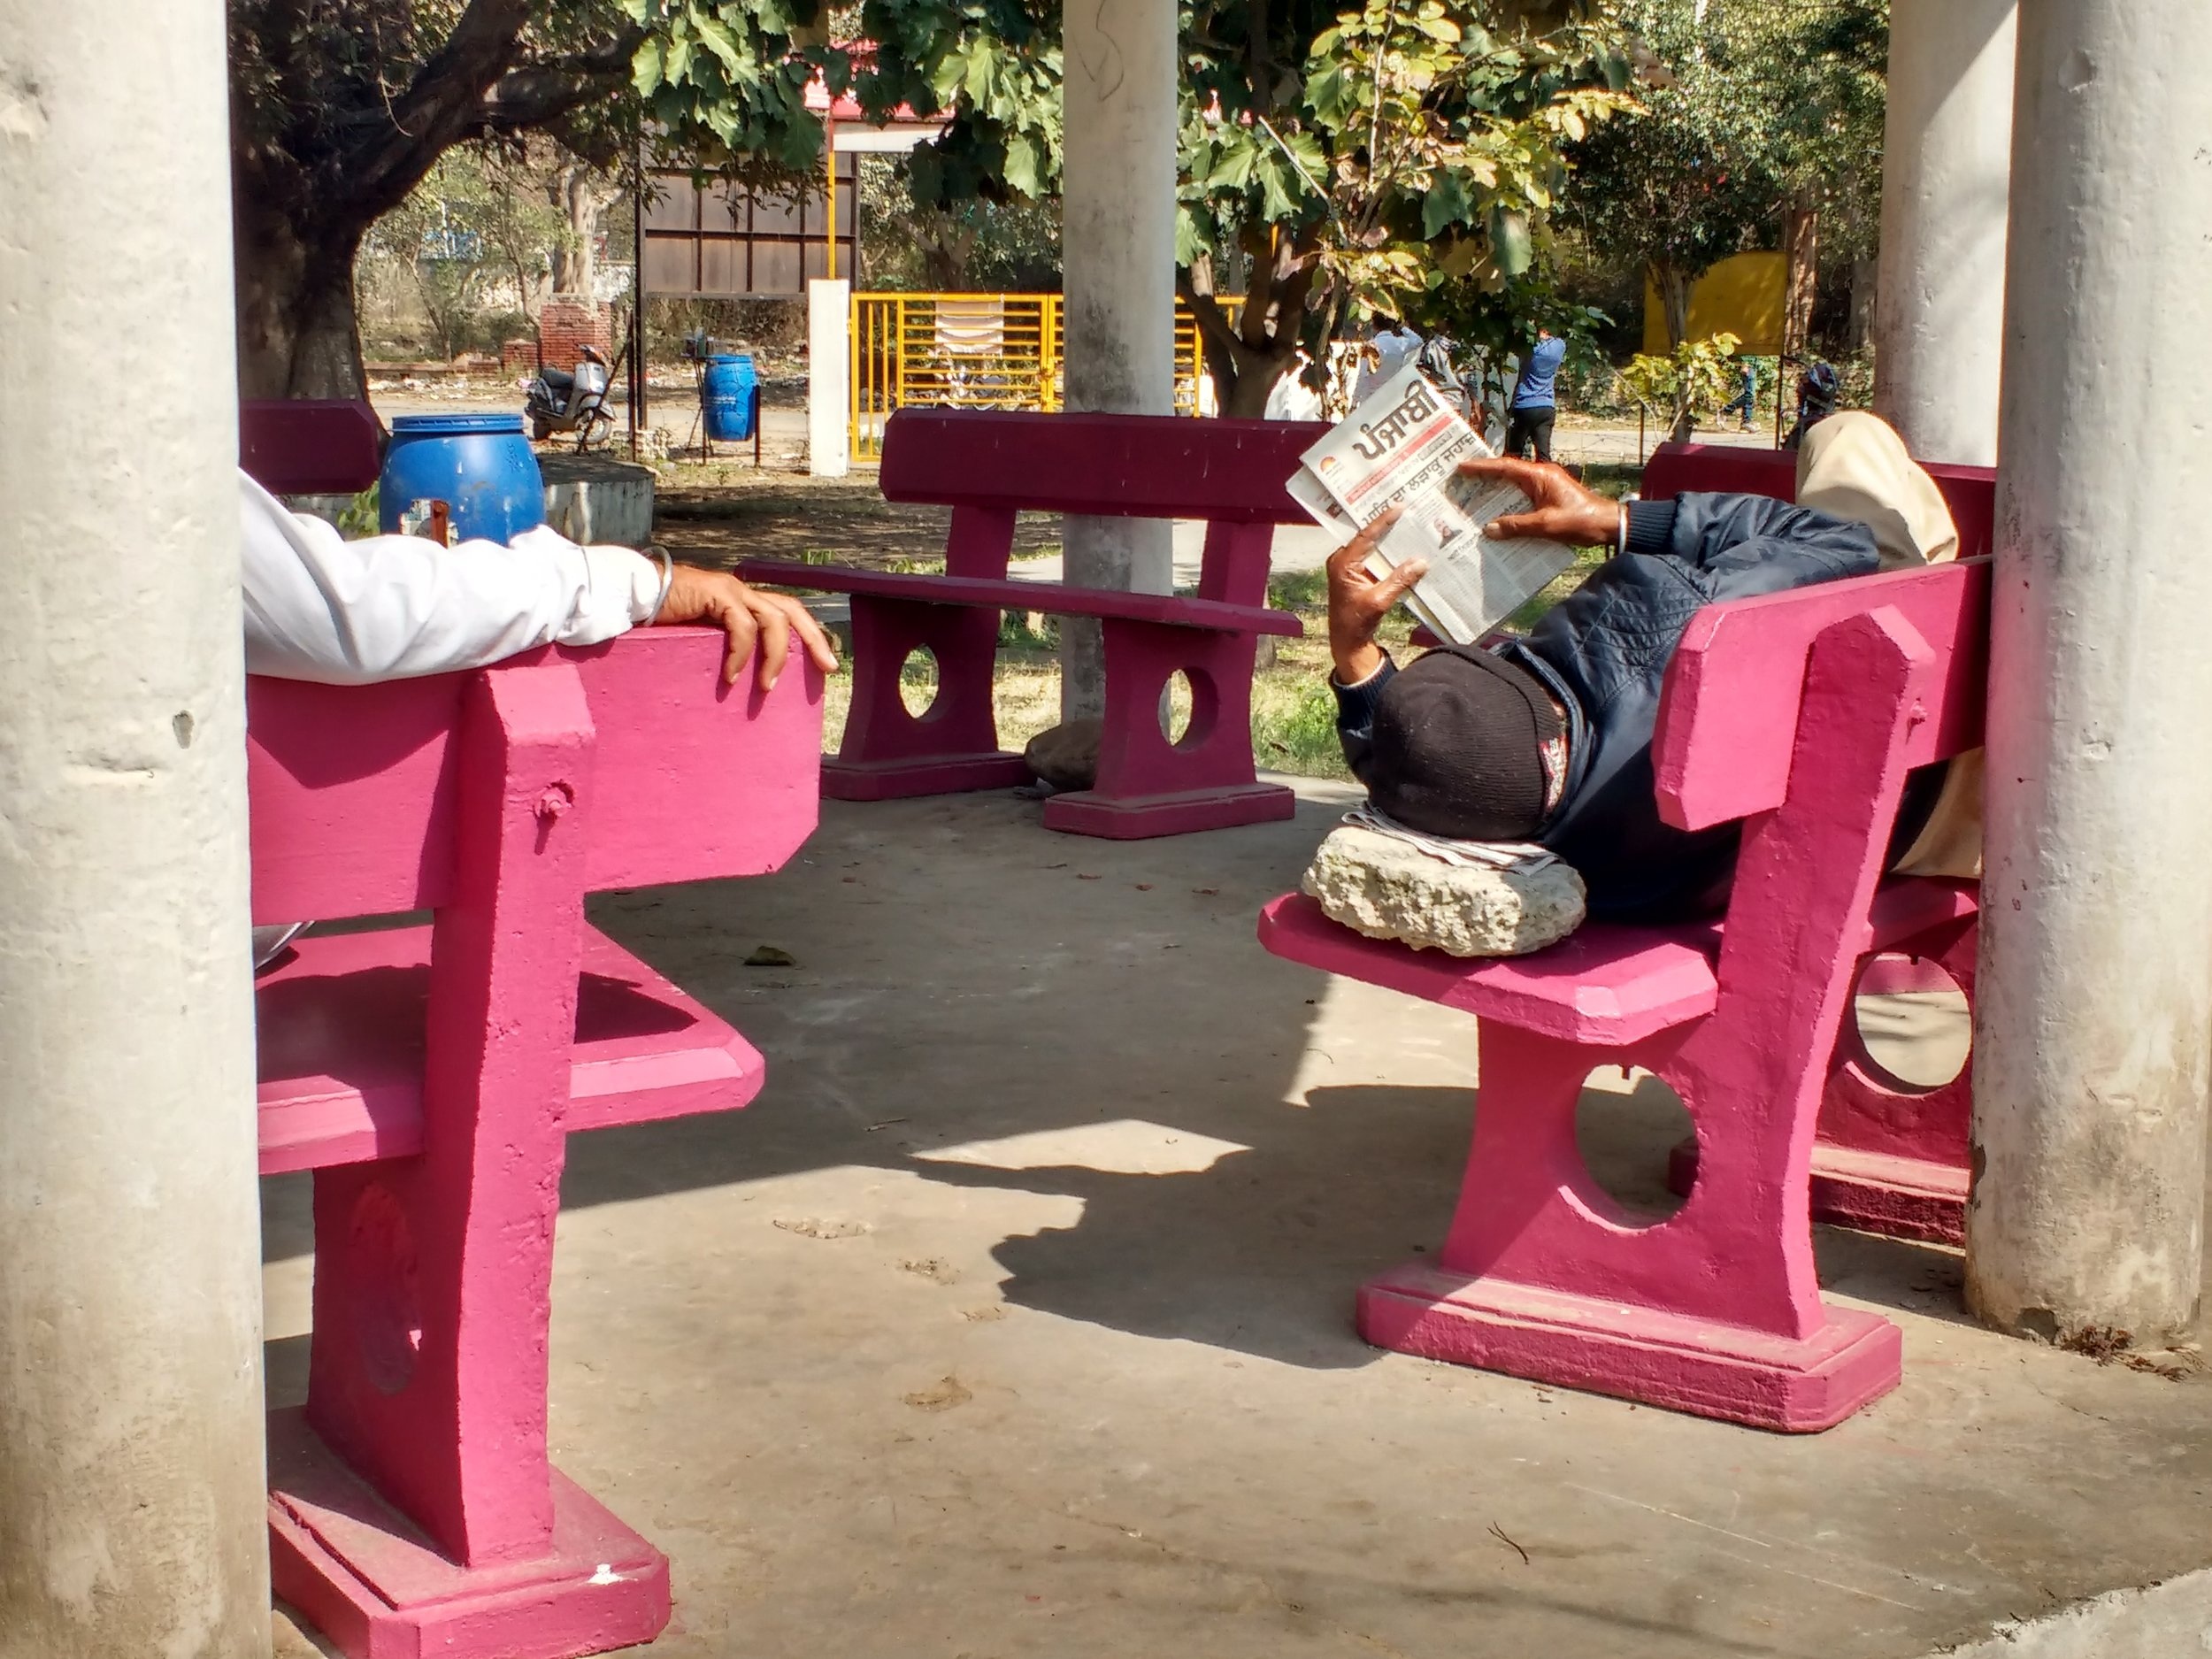 For many of the senior citizens adjoining the nearby colonies, the park area provides an important leisure place